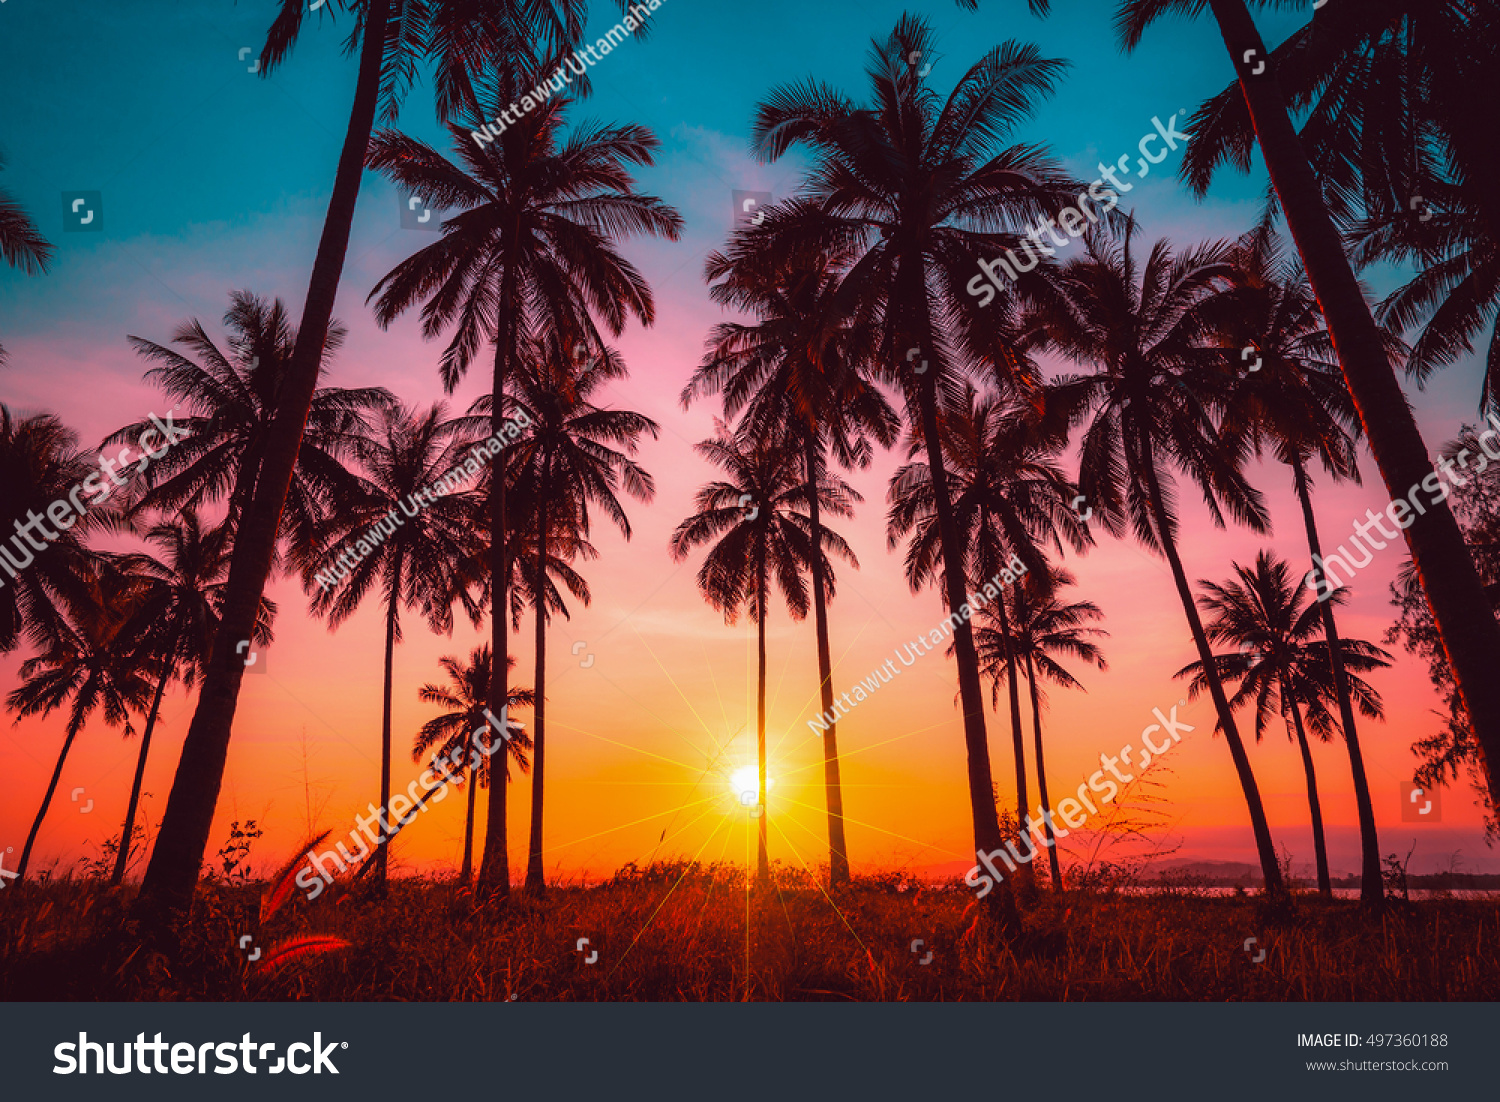 Silhouette coconut palm trees on beach at sunset. Vintage tone. #497360188